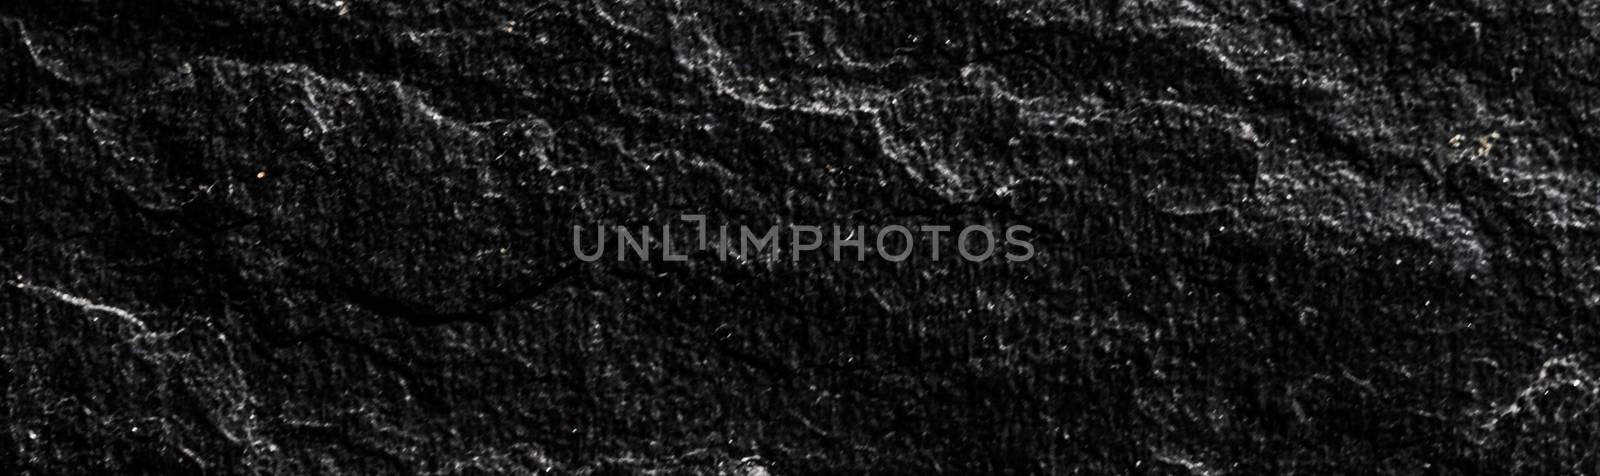 Black stone texture as abstract background, design material and textured surfaces